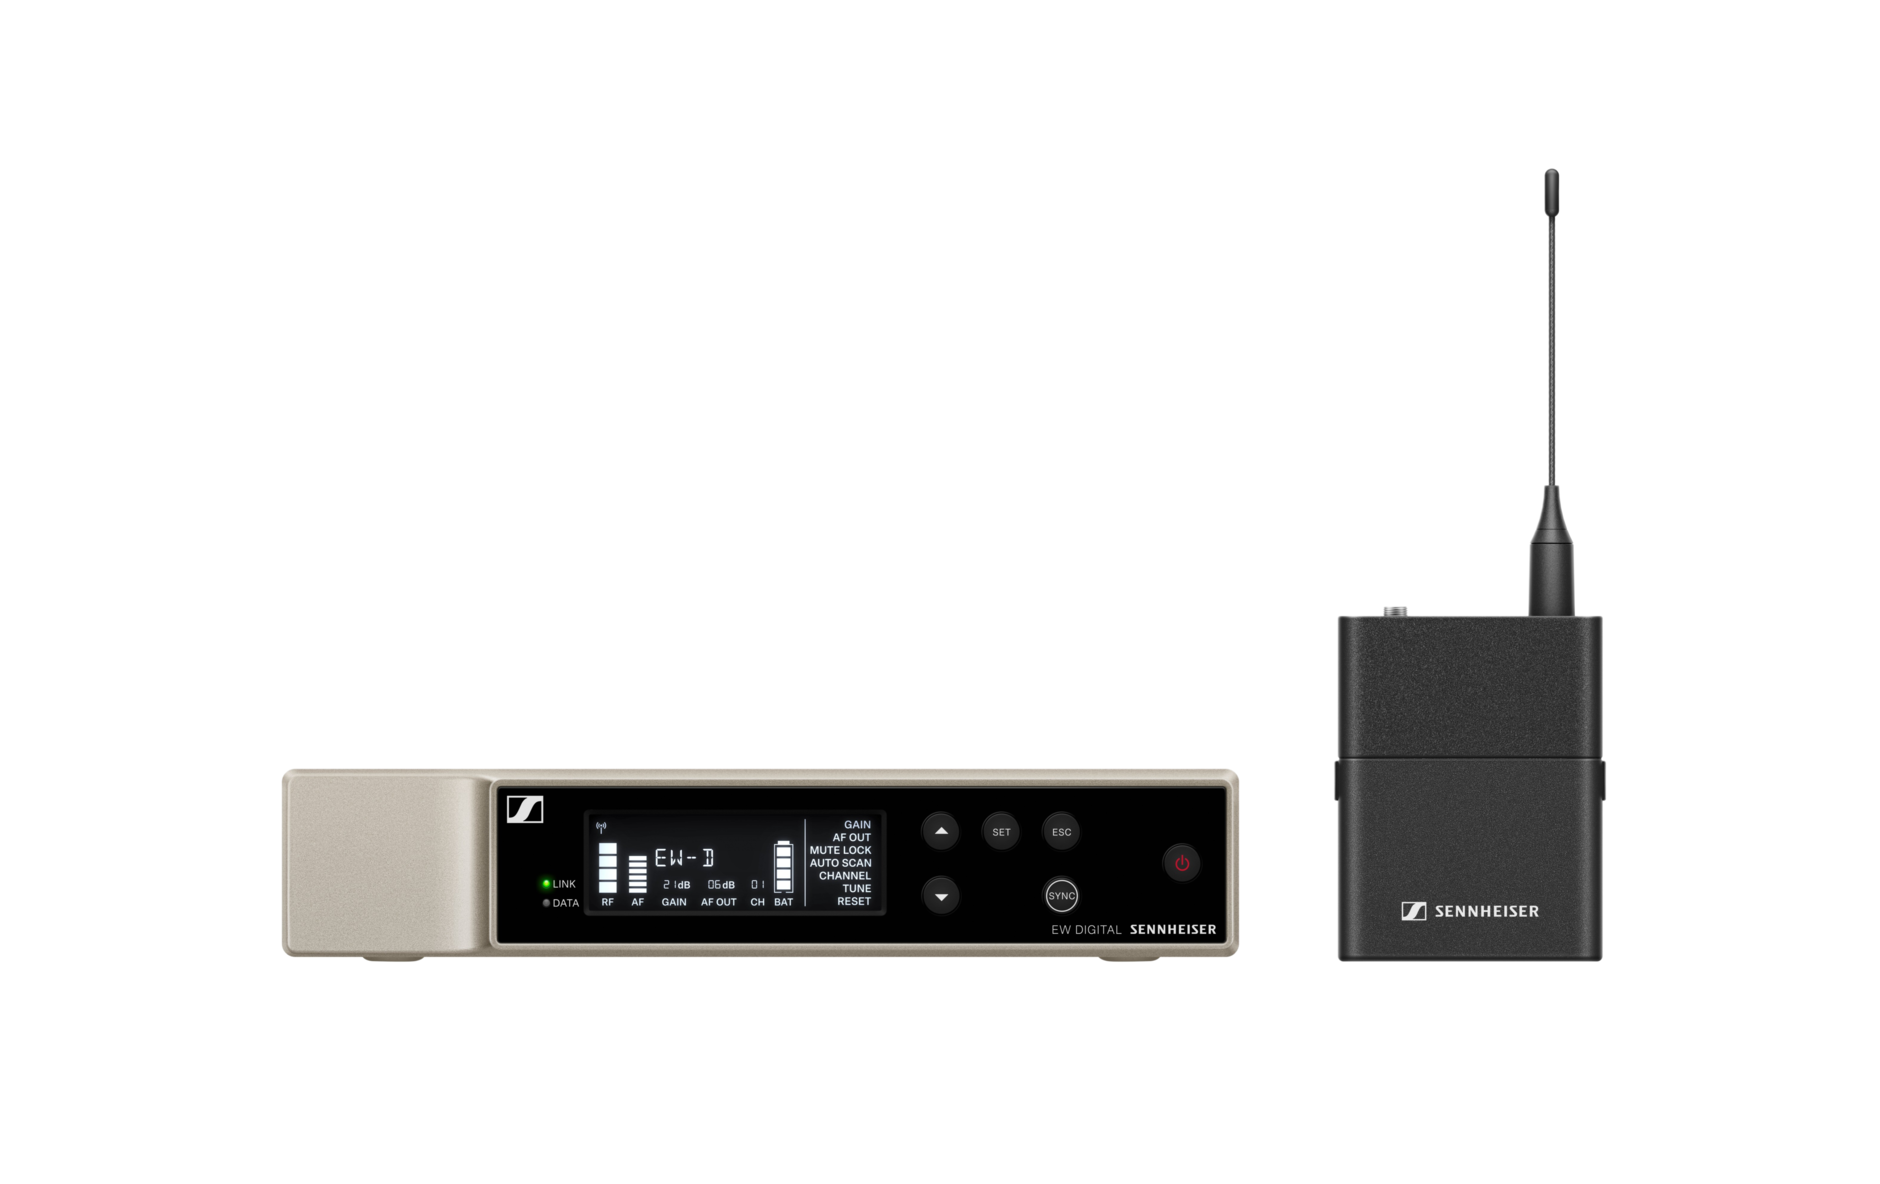 Sennheiser Showcases Expanded Evolution Wireless Digital Family at IFI -  Systems Integration Asia